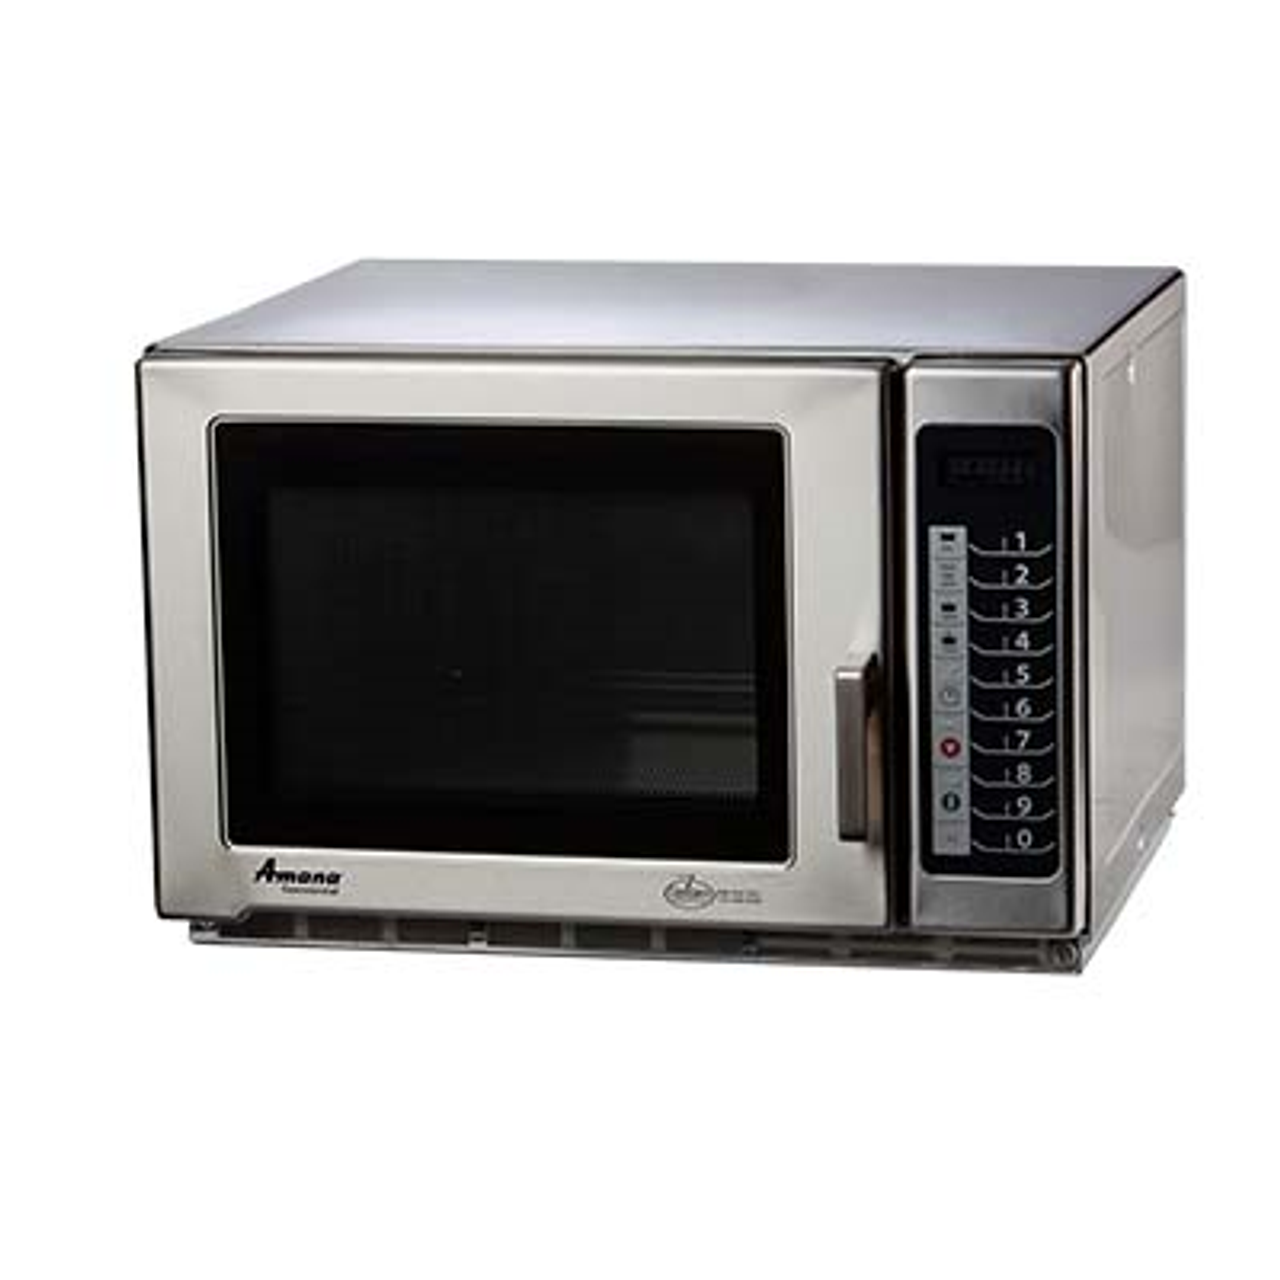 Amana® Commercial Microwave Oven, 1.2 cu. ft., 1200 watts, medium volume, 4-stage cooking, (5) power levels, (100) memory settings, 60-minute max cooking time, LED display, touch control, ADA-compliant Braille touch pads, audible end of cycle signal, side hinged door with tempered glass, lighted interior, sealed-in ceramic shelf, stainless steel exterior & interior, 120v/60/1-ph, 16.0 amps, 20 MCA, 2000 watts (total), NEMA 5-20P, cETLus, ETL-Sanitation